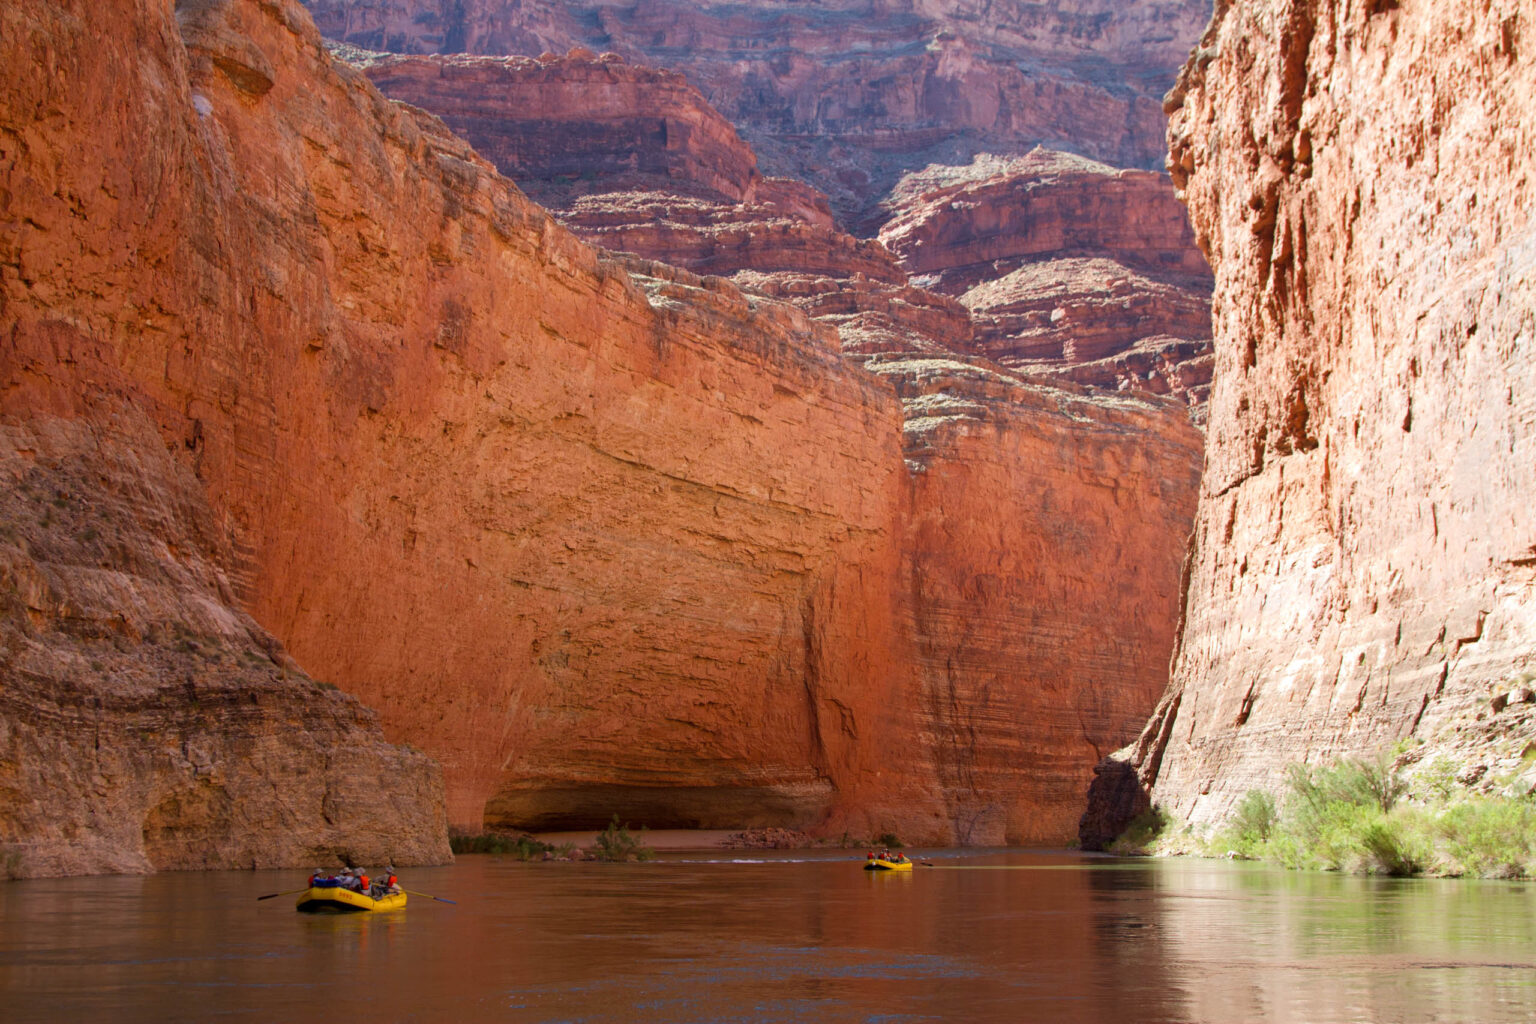 Whitewater rafting the Grand Canyon.